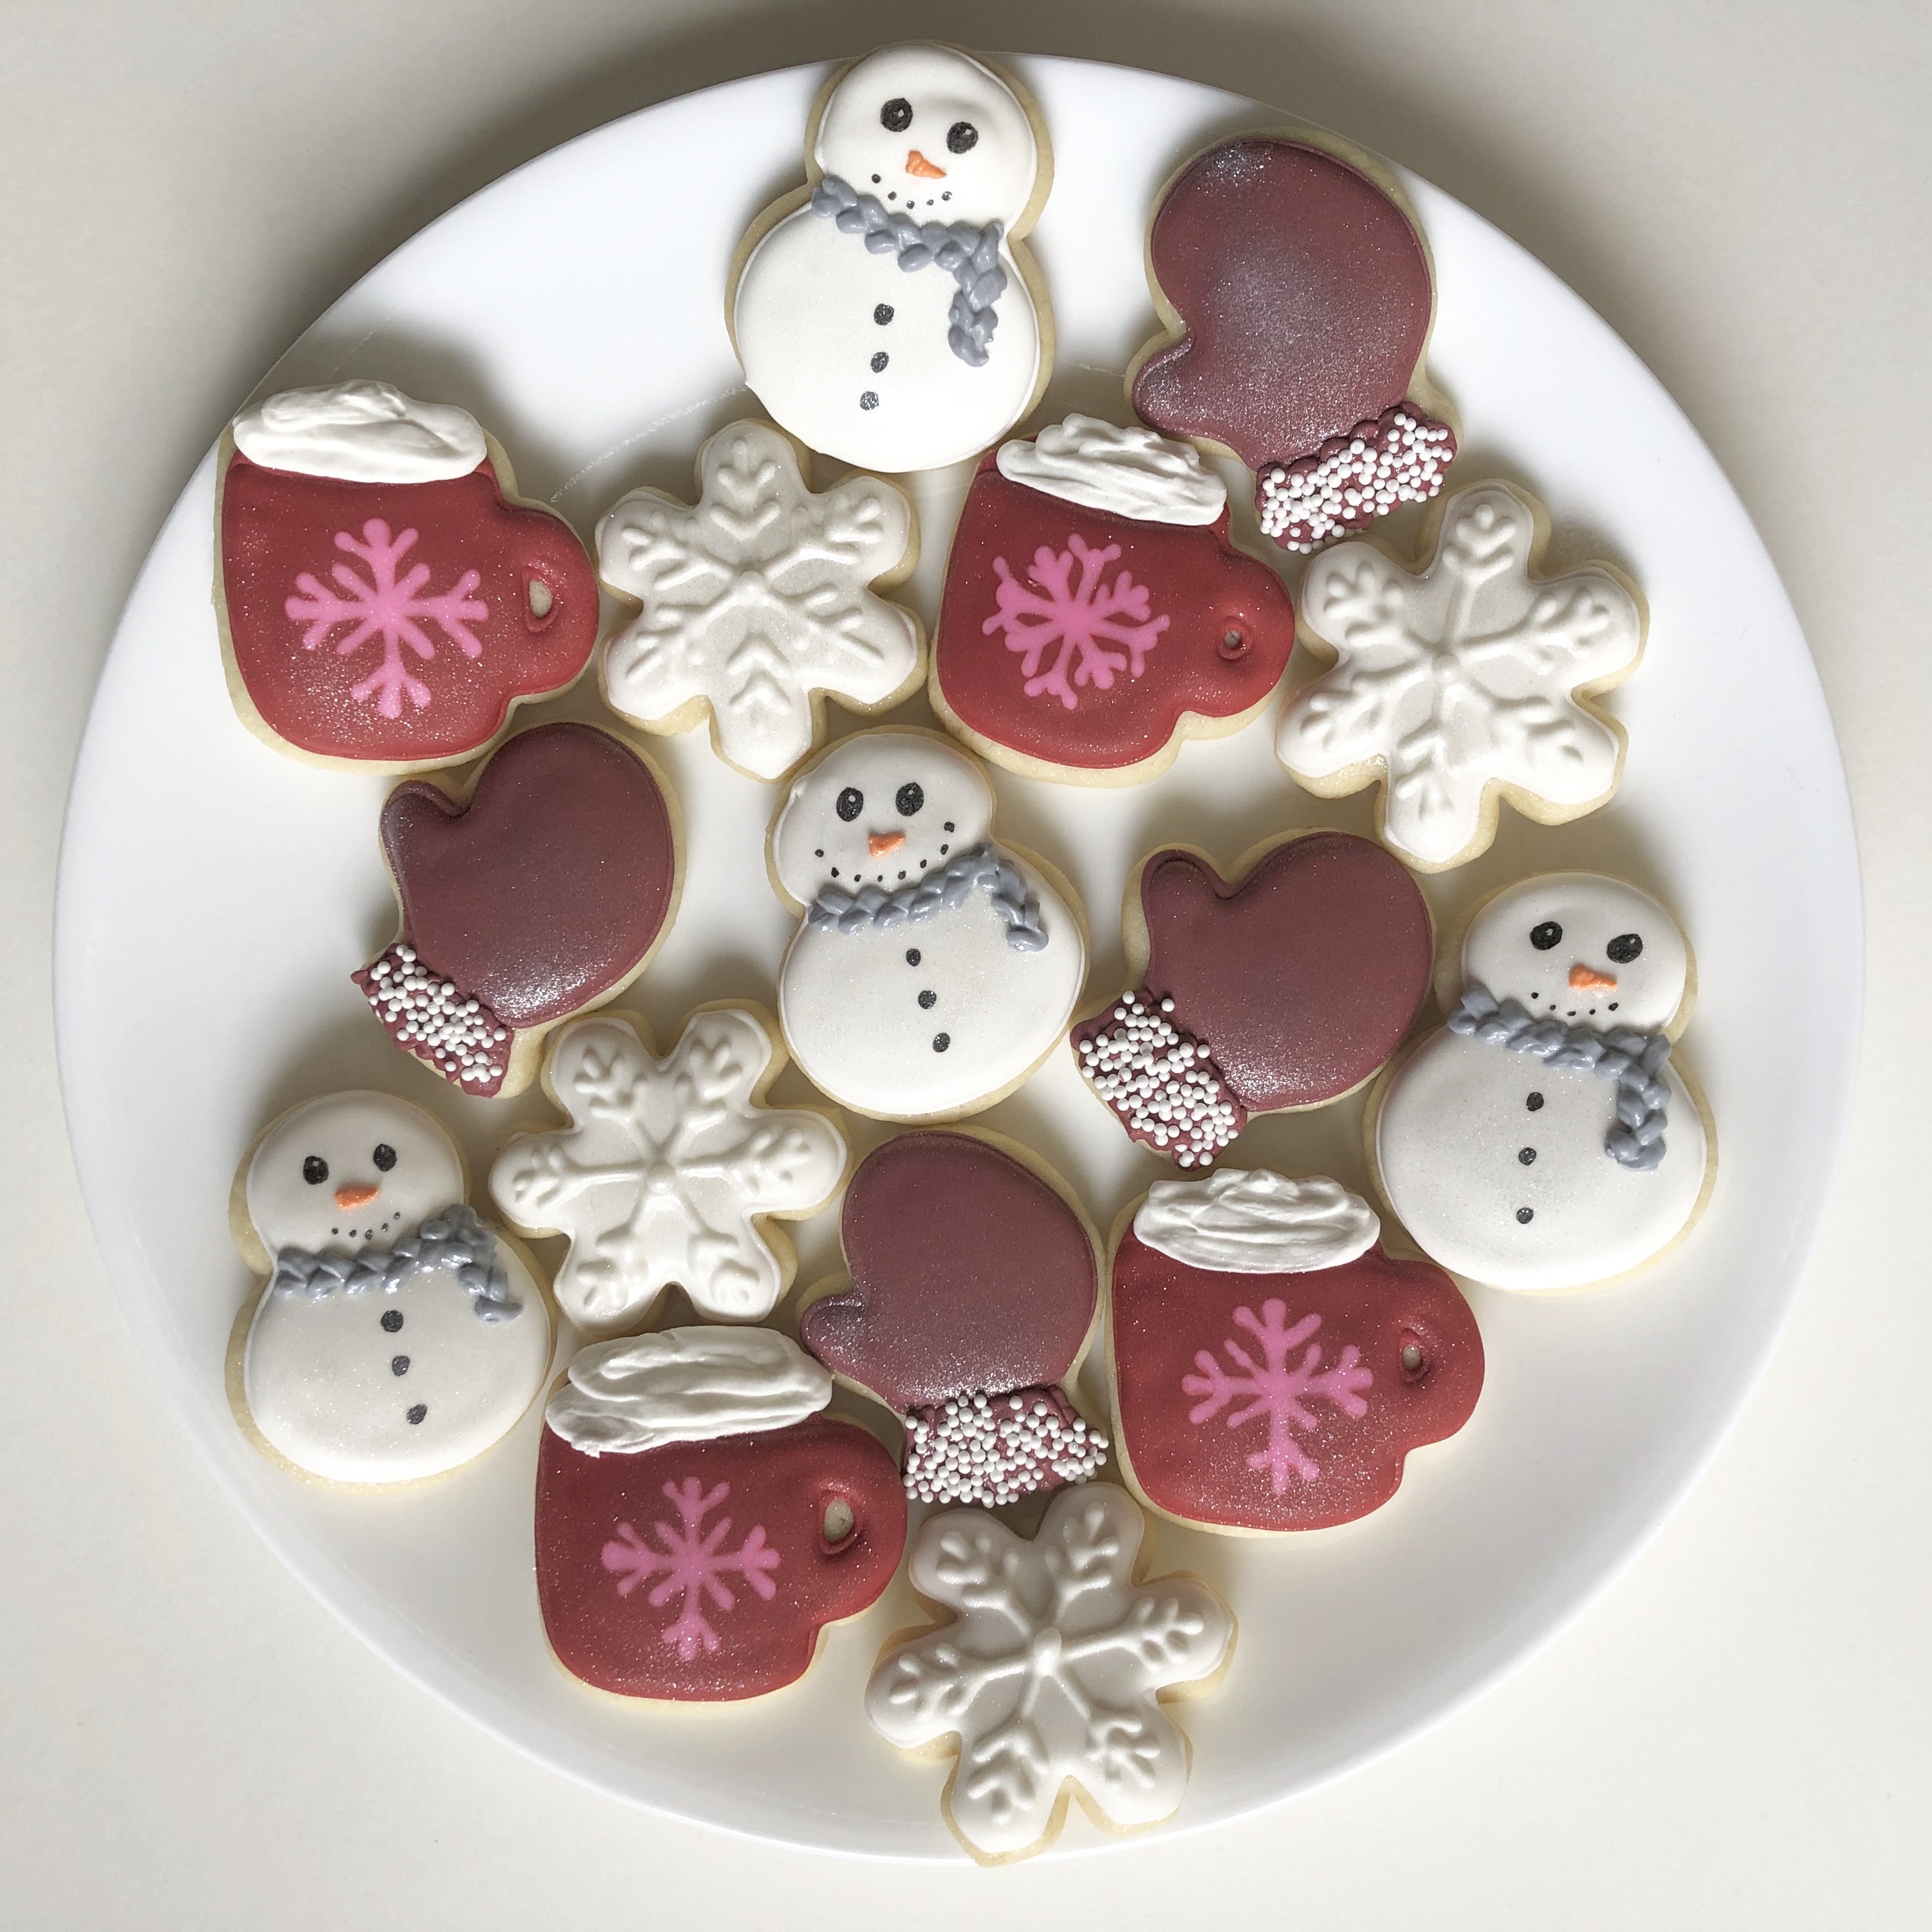 Iced sugar cookies decorated like snowmen, cocoa cups, mittens, and snowflakes